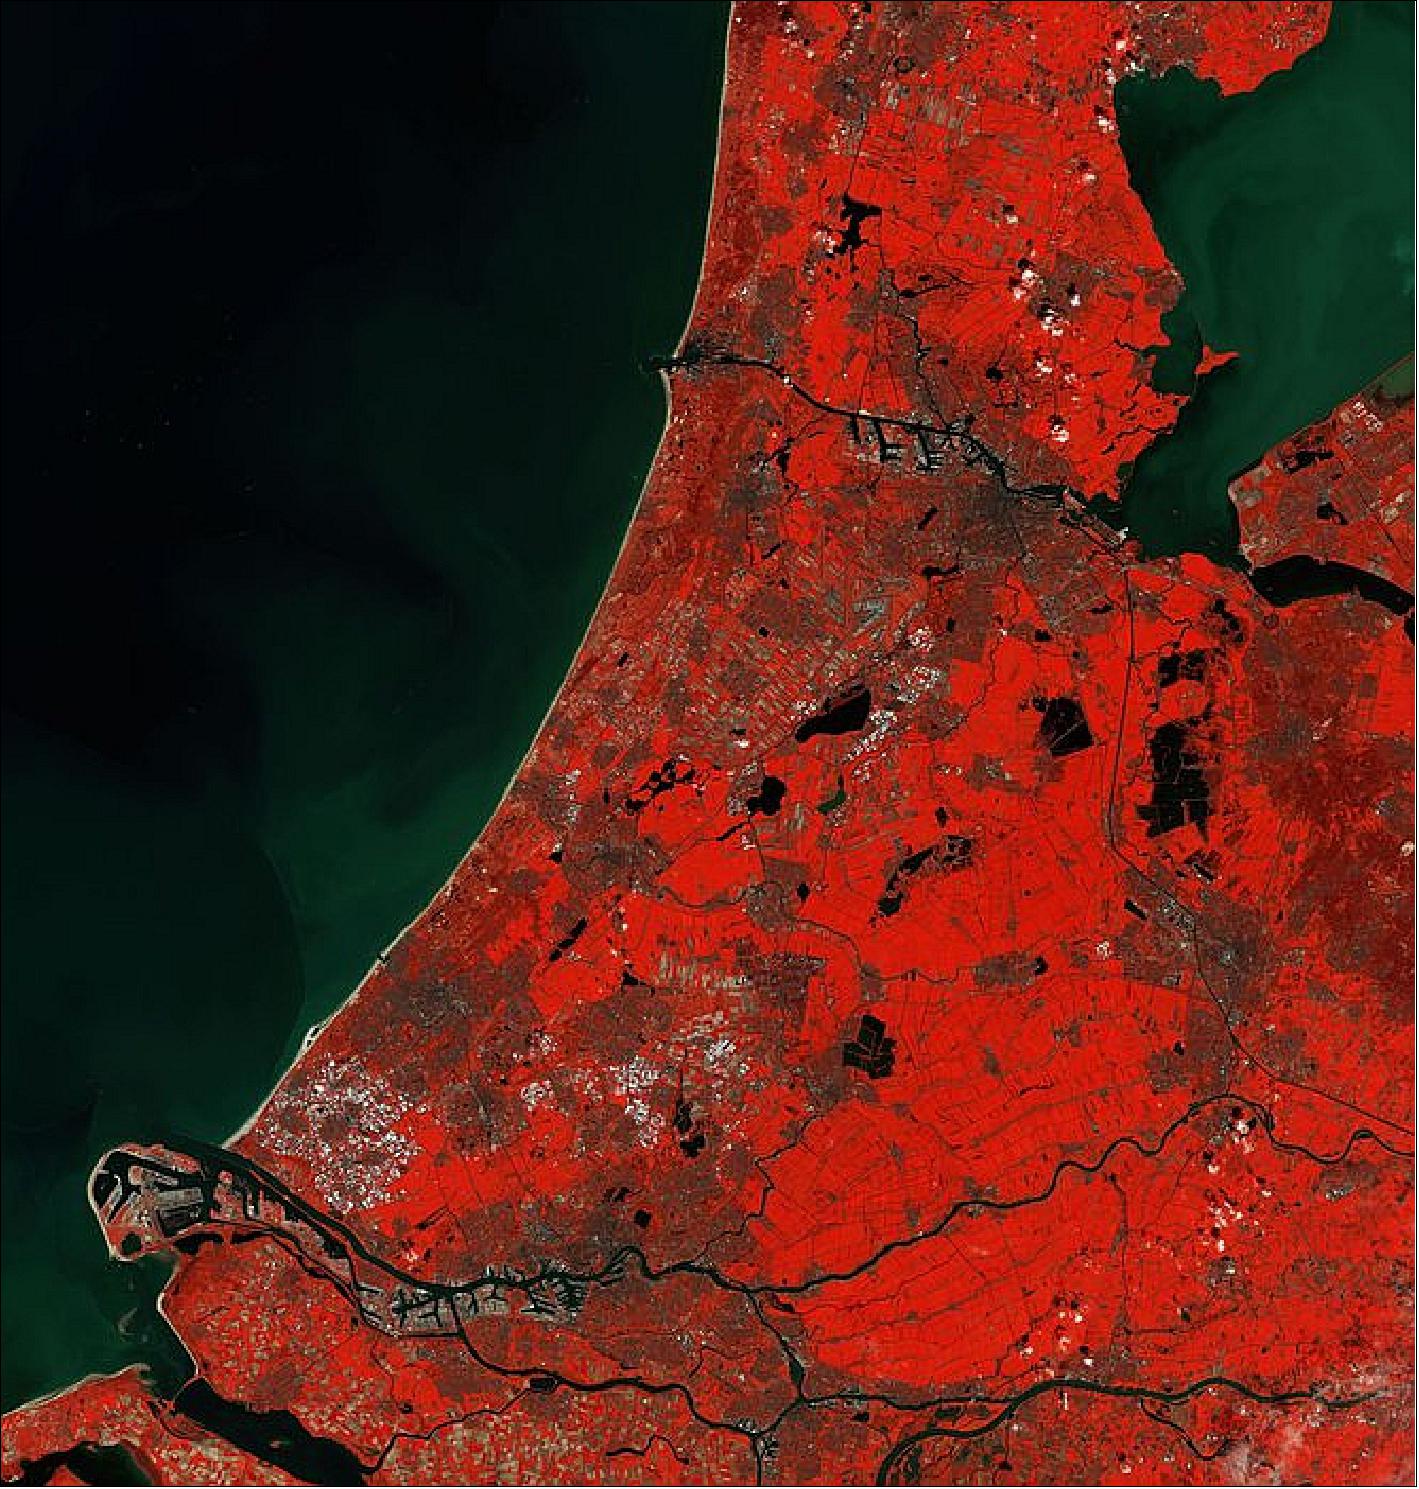 Figure 11: ESA's Earth from Space image of the Netherlands was acquired with the Sentinel-2 satellite. The image is also featured on the Earth from Space video program (image credit: ESA, the image contains modified Copernicus Sentinel data (2016), processed by ESA, CC BY-SA 3.0 IGO)